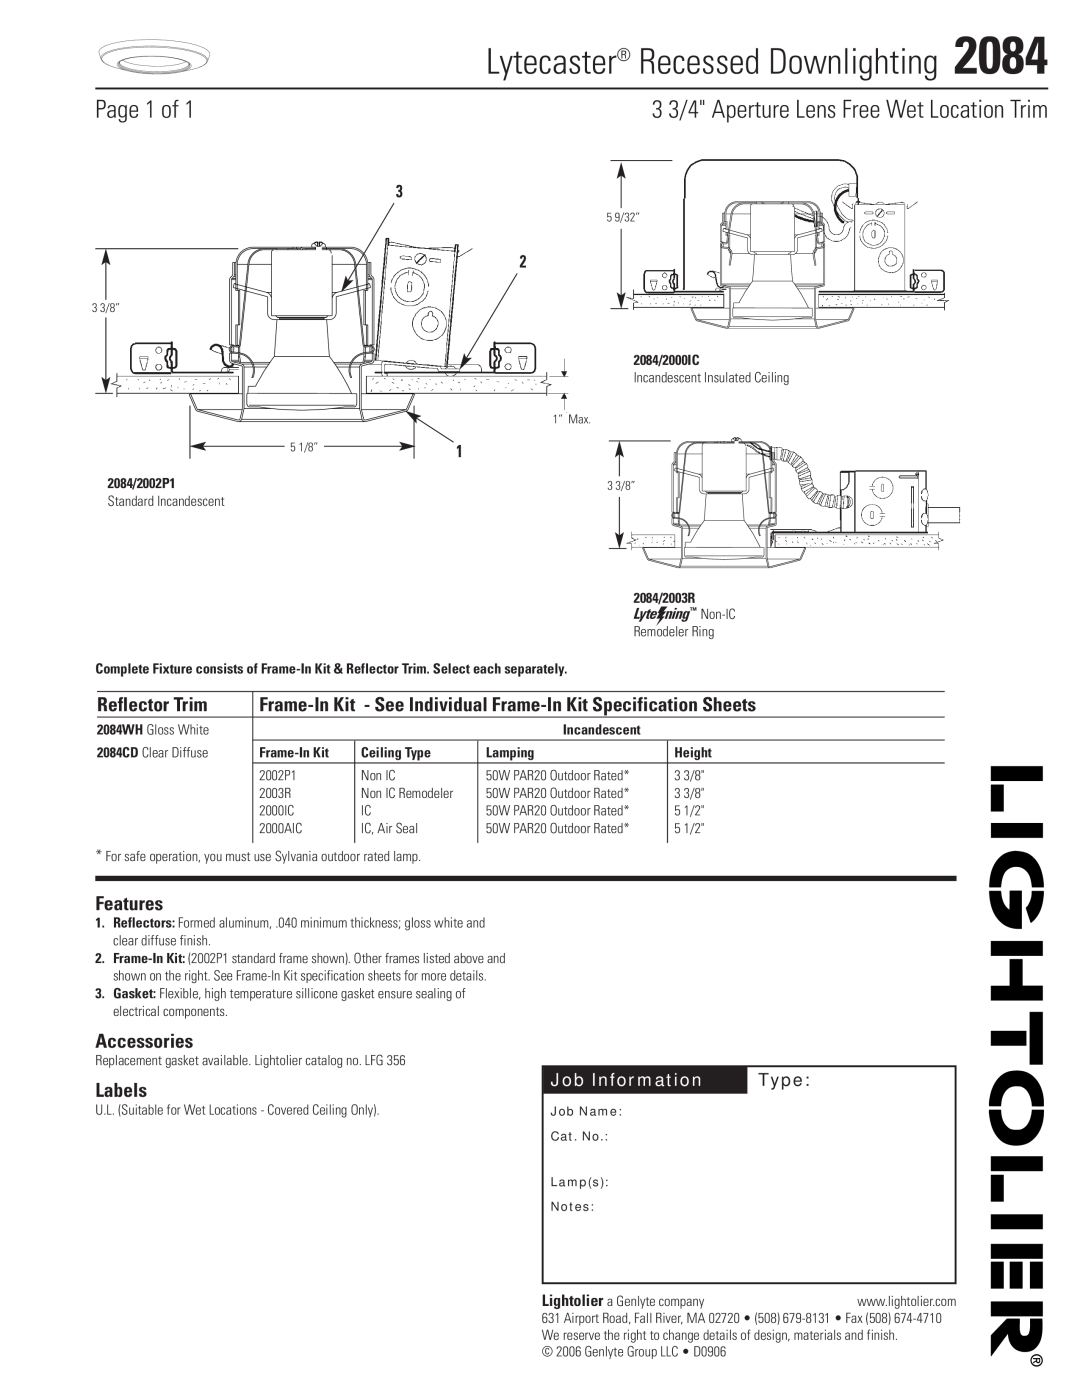 Lightolier 2084 specifications Lytecaster Recessed Downlighting, Page 1 of, 3 3/4 Aperture Lens Free Wet Location Trim 